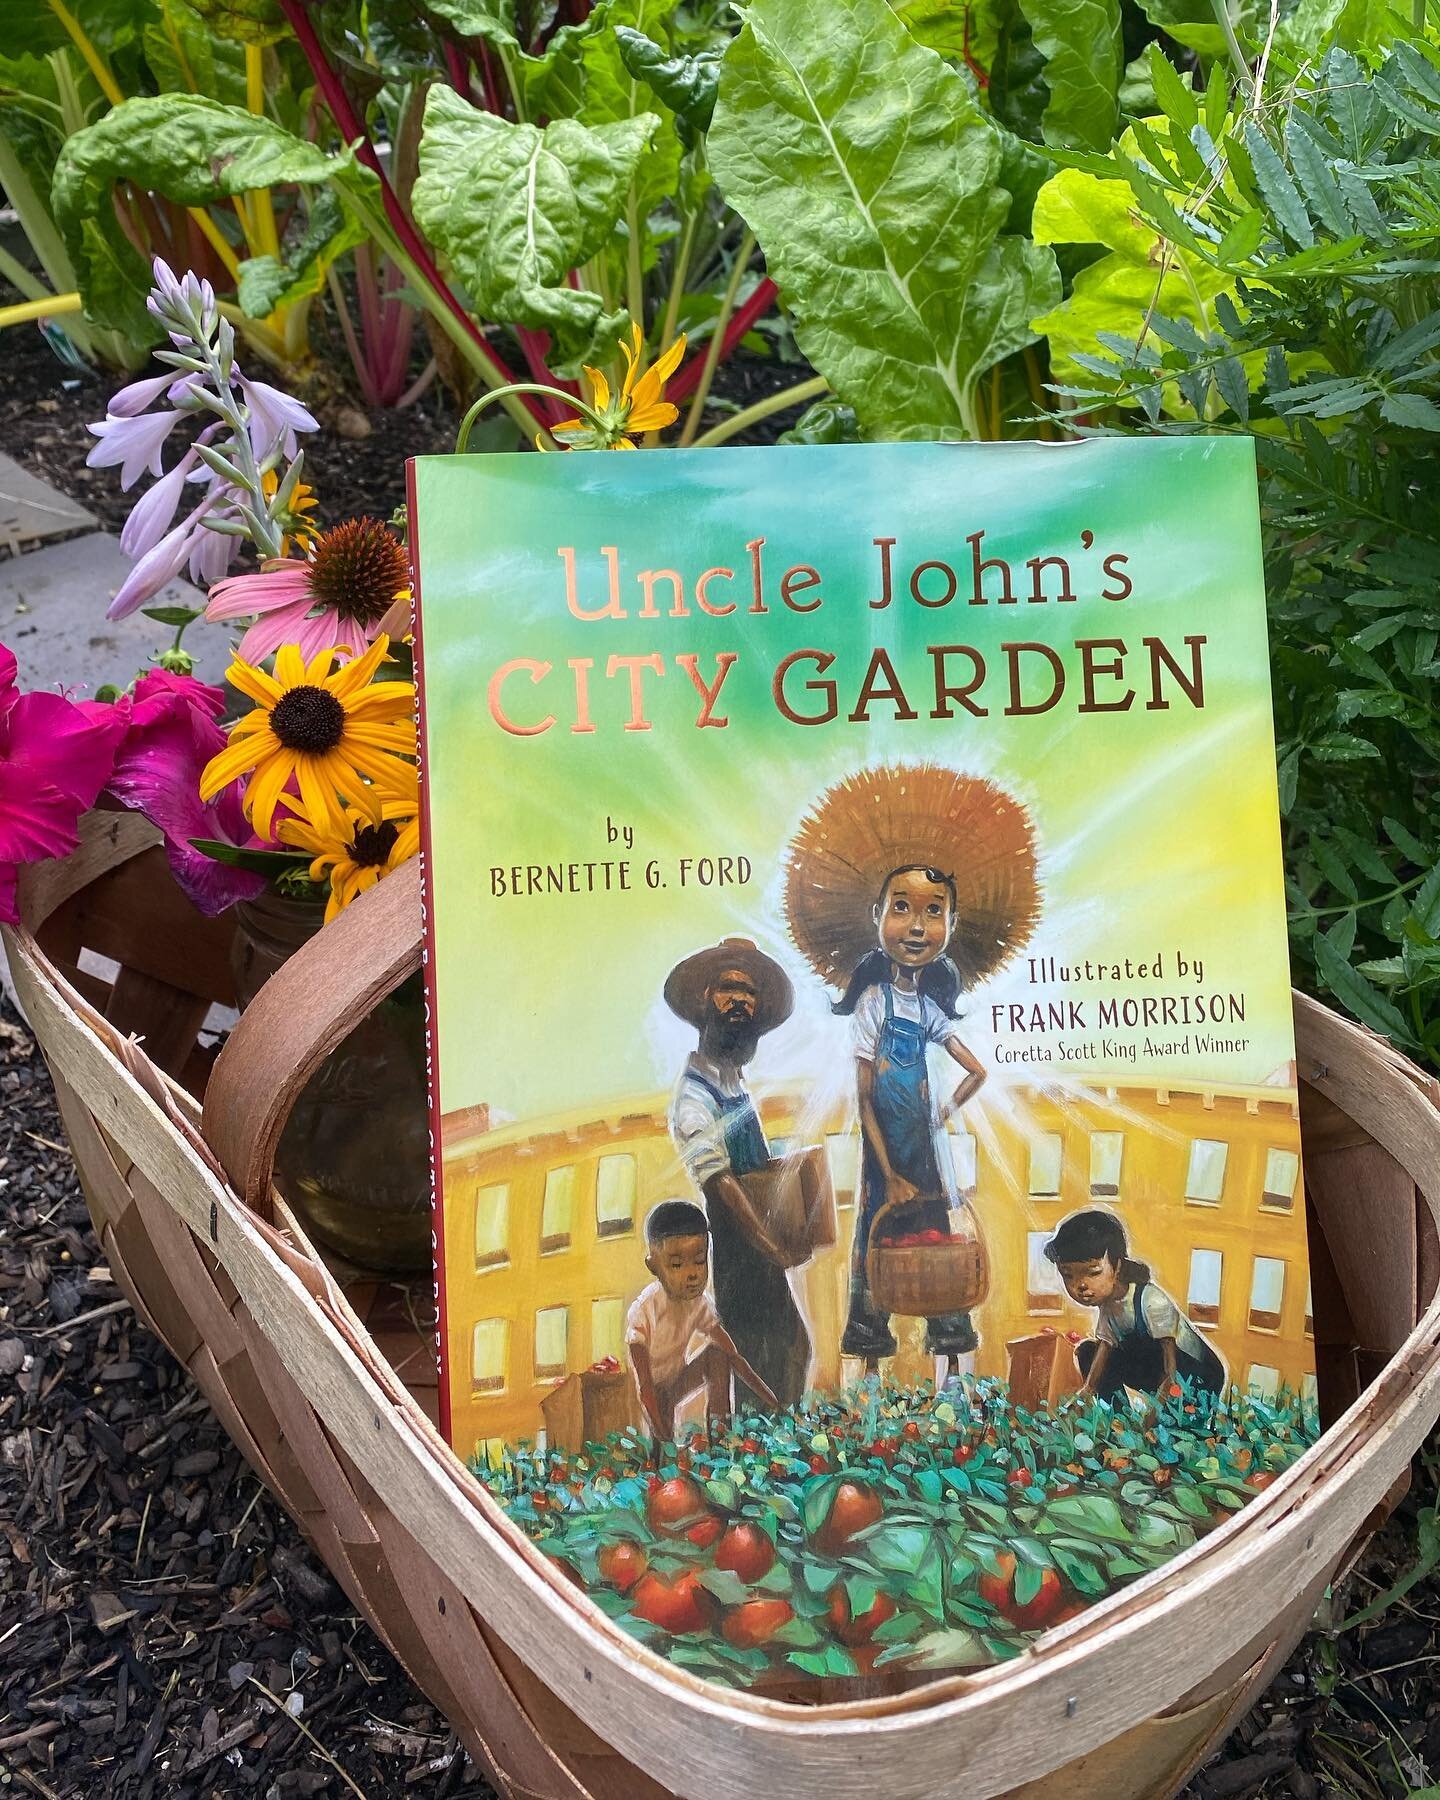 UNCLE JOHN&rsquo;S CITY GARDEN, written by Bernette G. Ford and illustrated by Frank Morrison is a gardening story we&rsquo;re so thankful to have come across this summer. 

In this book, Li&rsquo;l Sissy and her siblings help their Uncle John transf